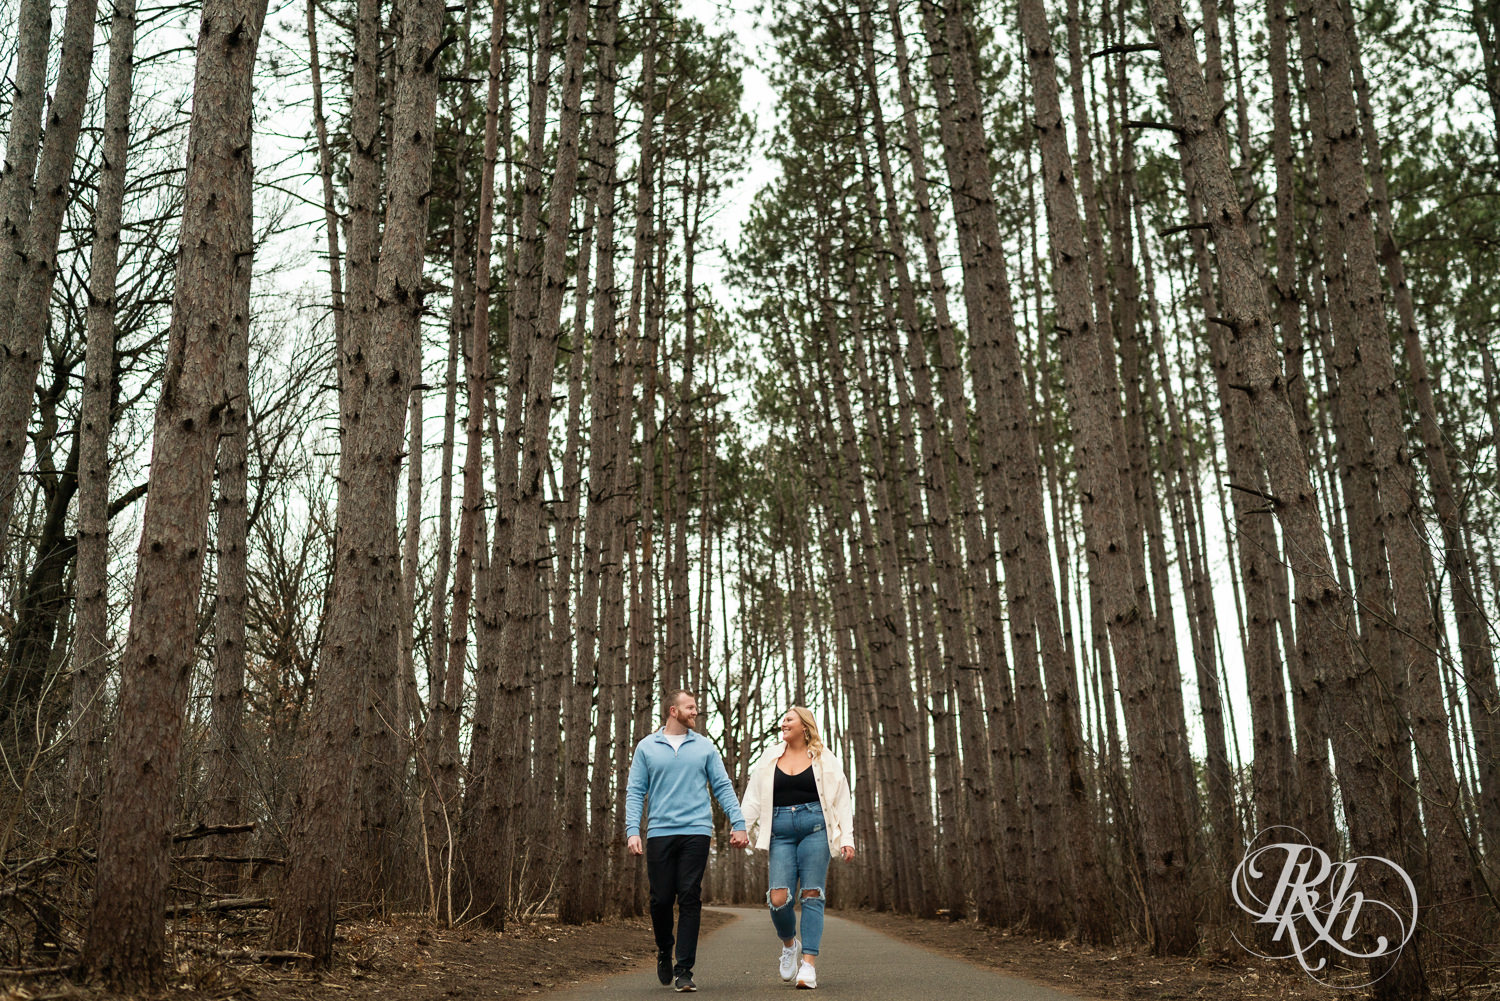 Man in blue shirt and woman in jeans walk between tall trees during engagement photography at Rice Creek Regional Trail in Shoreview, Minnesota.